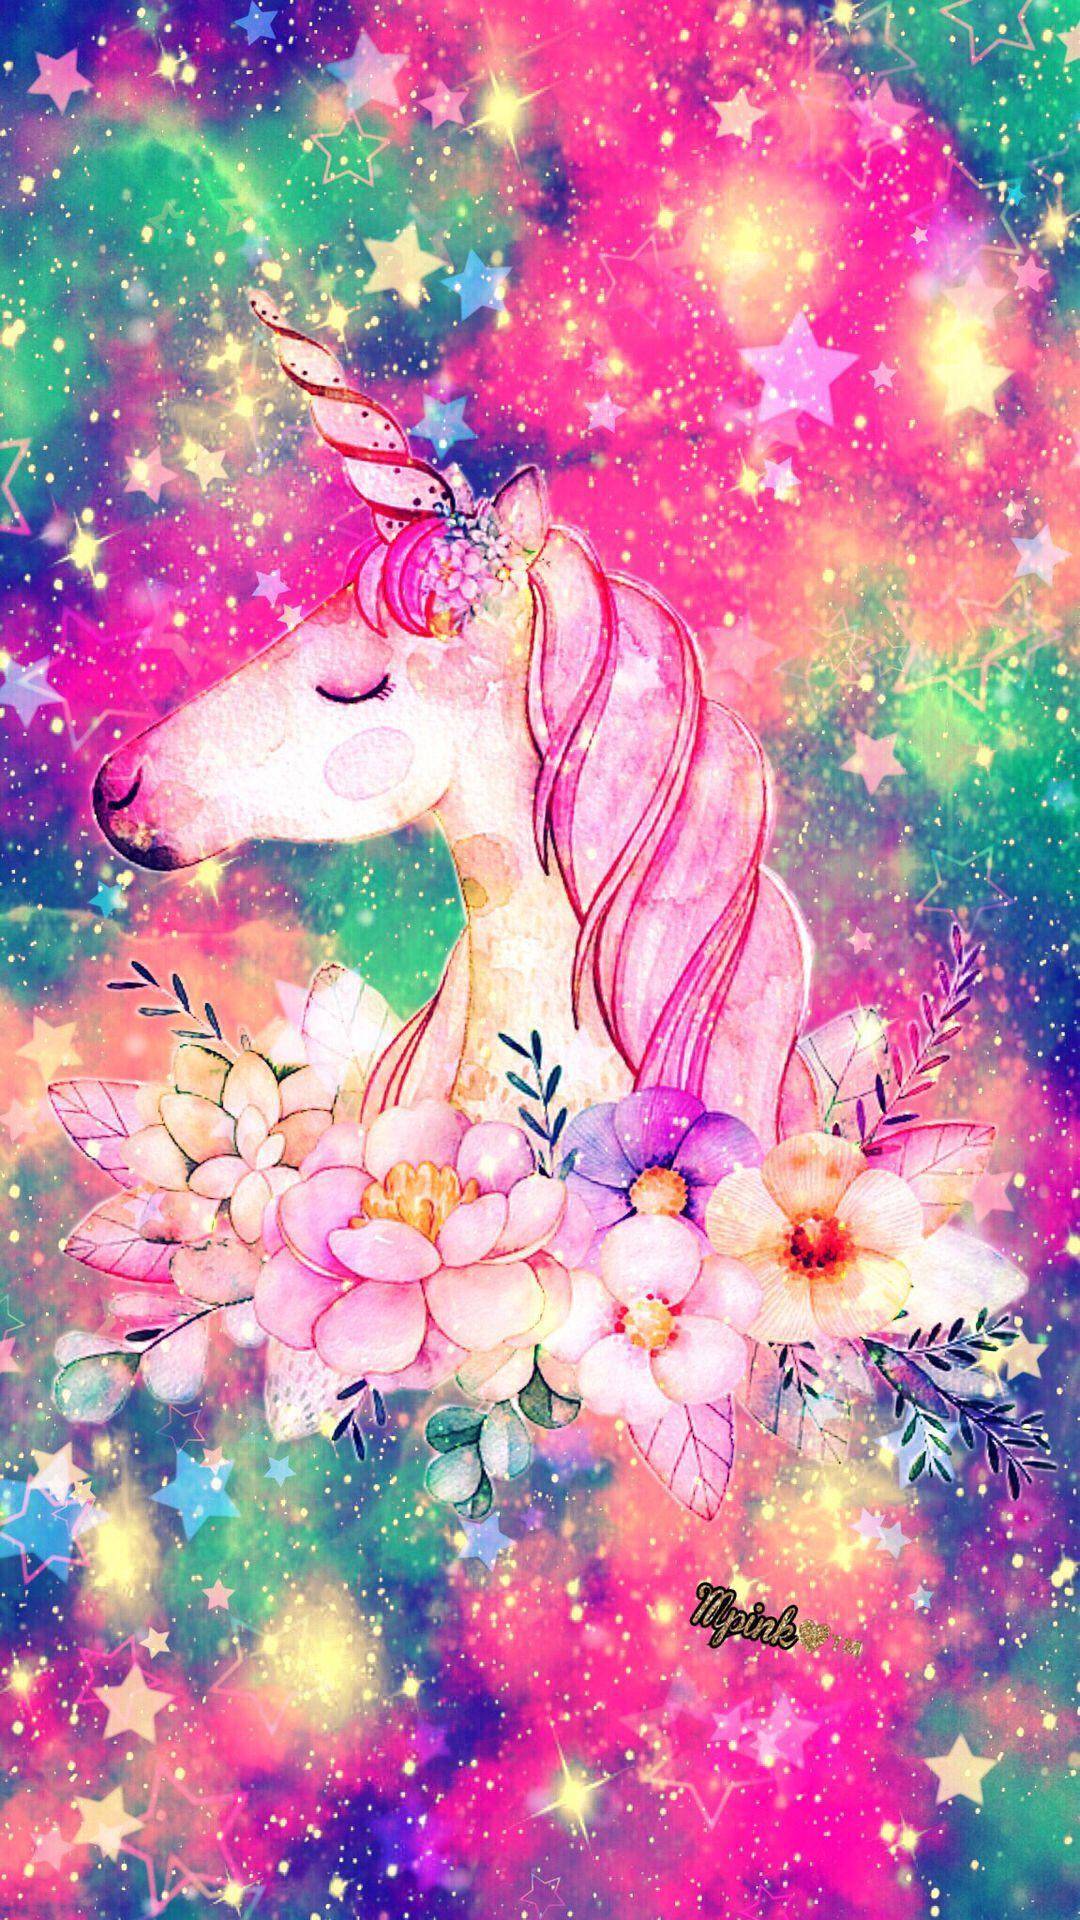 Glitter and Unicorns Wallpapers  Top Free Glitter and Unicorns Backgrounds   WallpaperAccess  Friends wallpaper Best friend wallpaper Galaxy  wallpaper